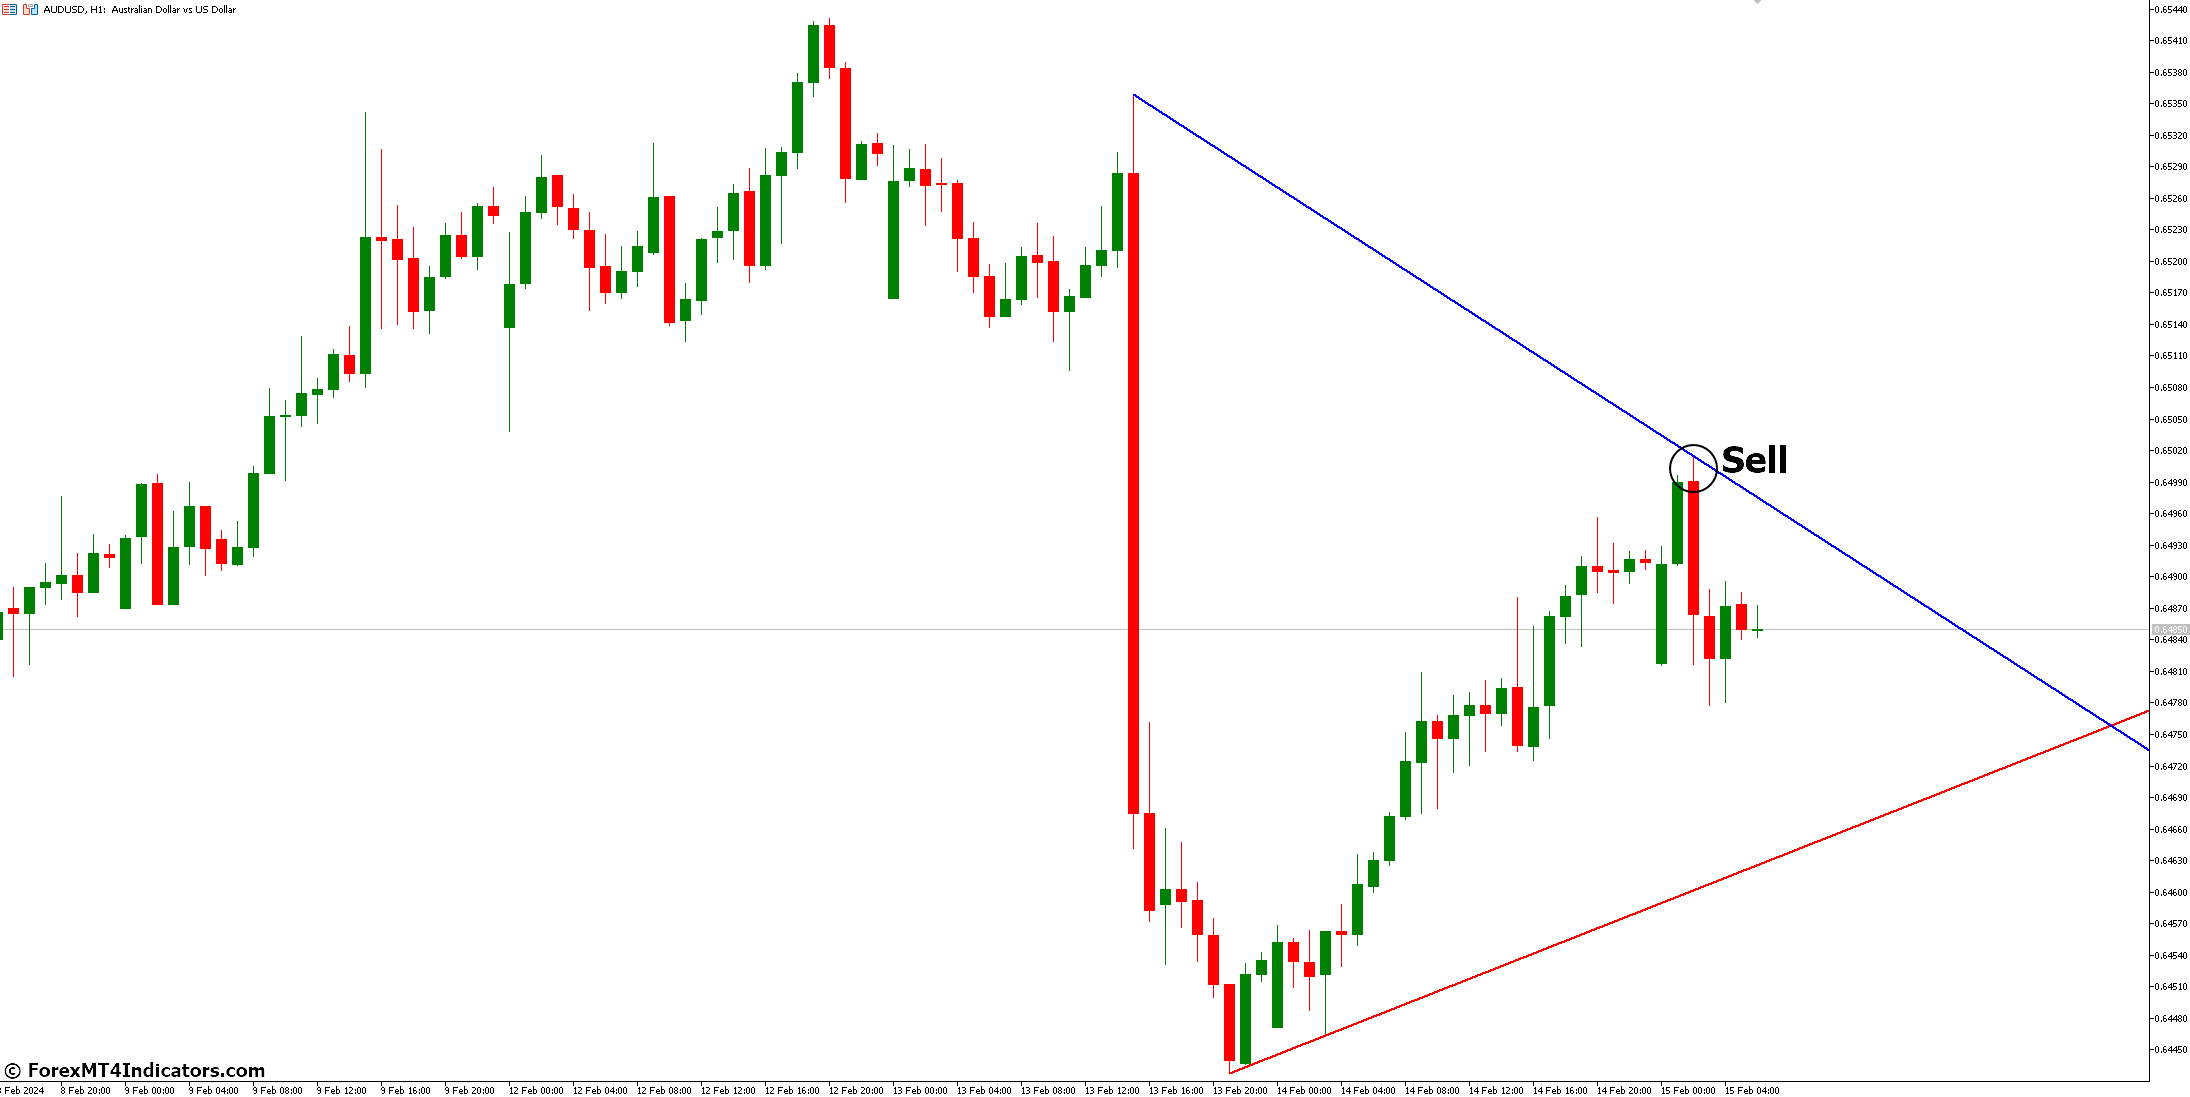 How to Trade with Auto Trendlines Indicator - Sell Entry